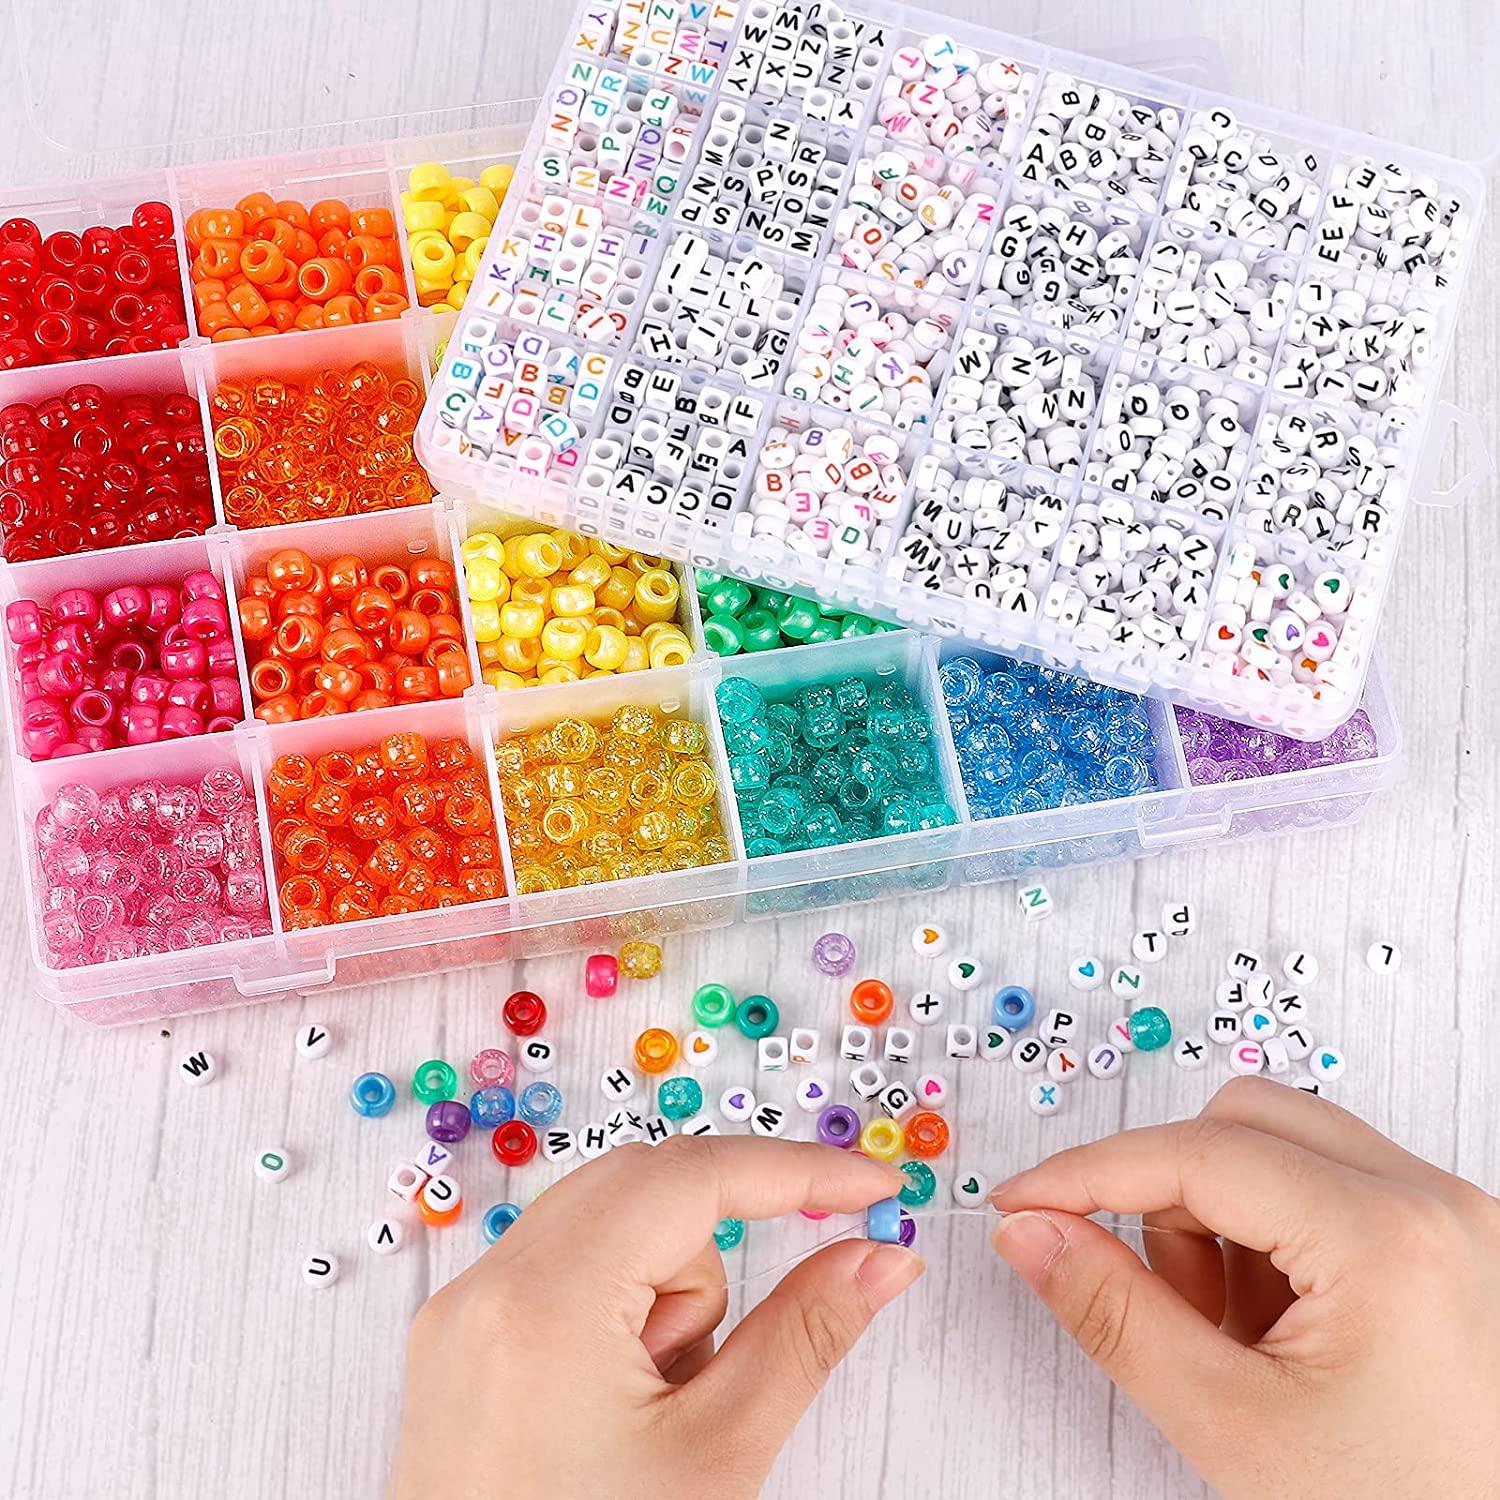 UOONY 4000pcs Pony Beads Kit, 2400pcs Rainbow Kandi Beads and 1600pcs  Letter Beads, 24 Colors Plastic Craft Beads Bulk for Bracelets Jewelry  Making with 20m Crystal String and 30m Elastic String